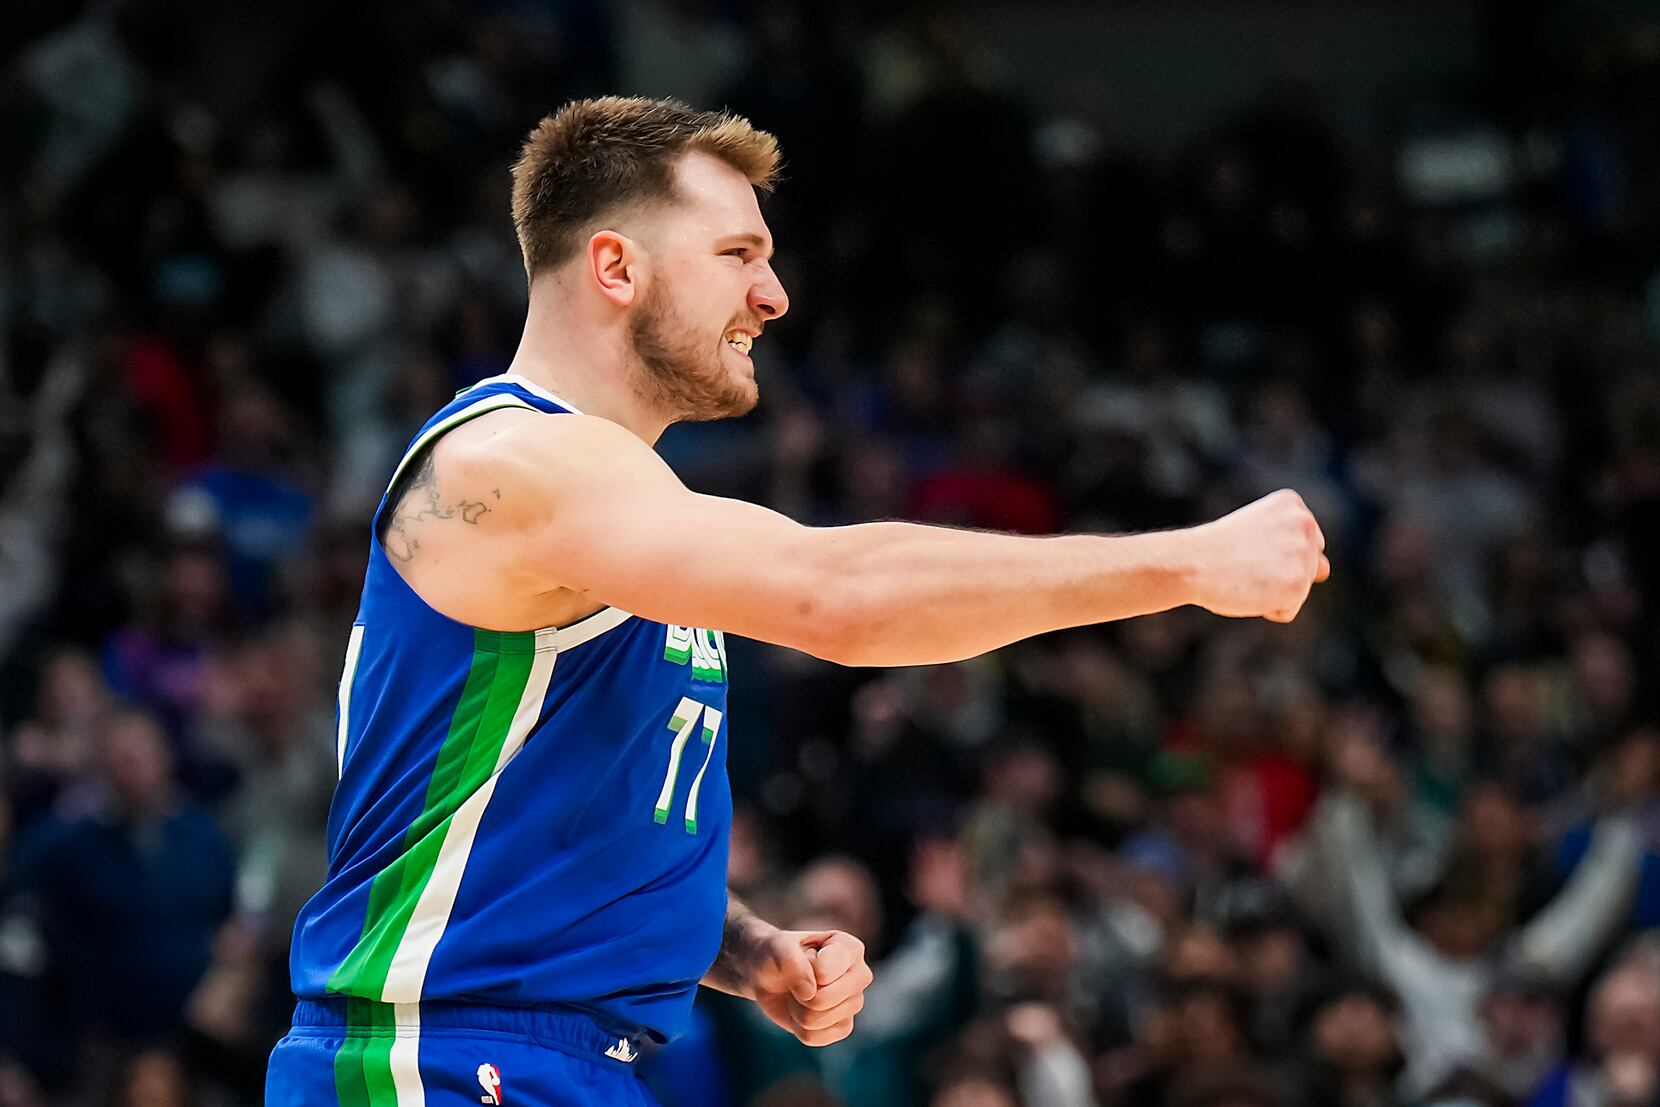 Luka Doncic drops 53 in Mavs' win while chirping with Pistons